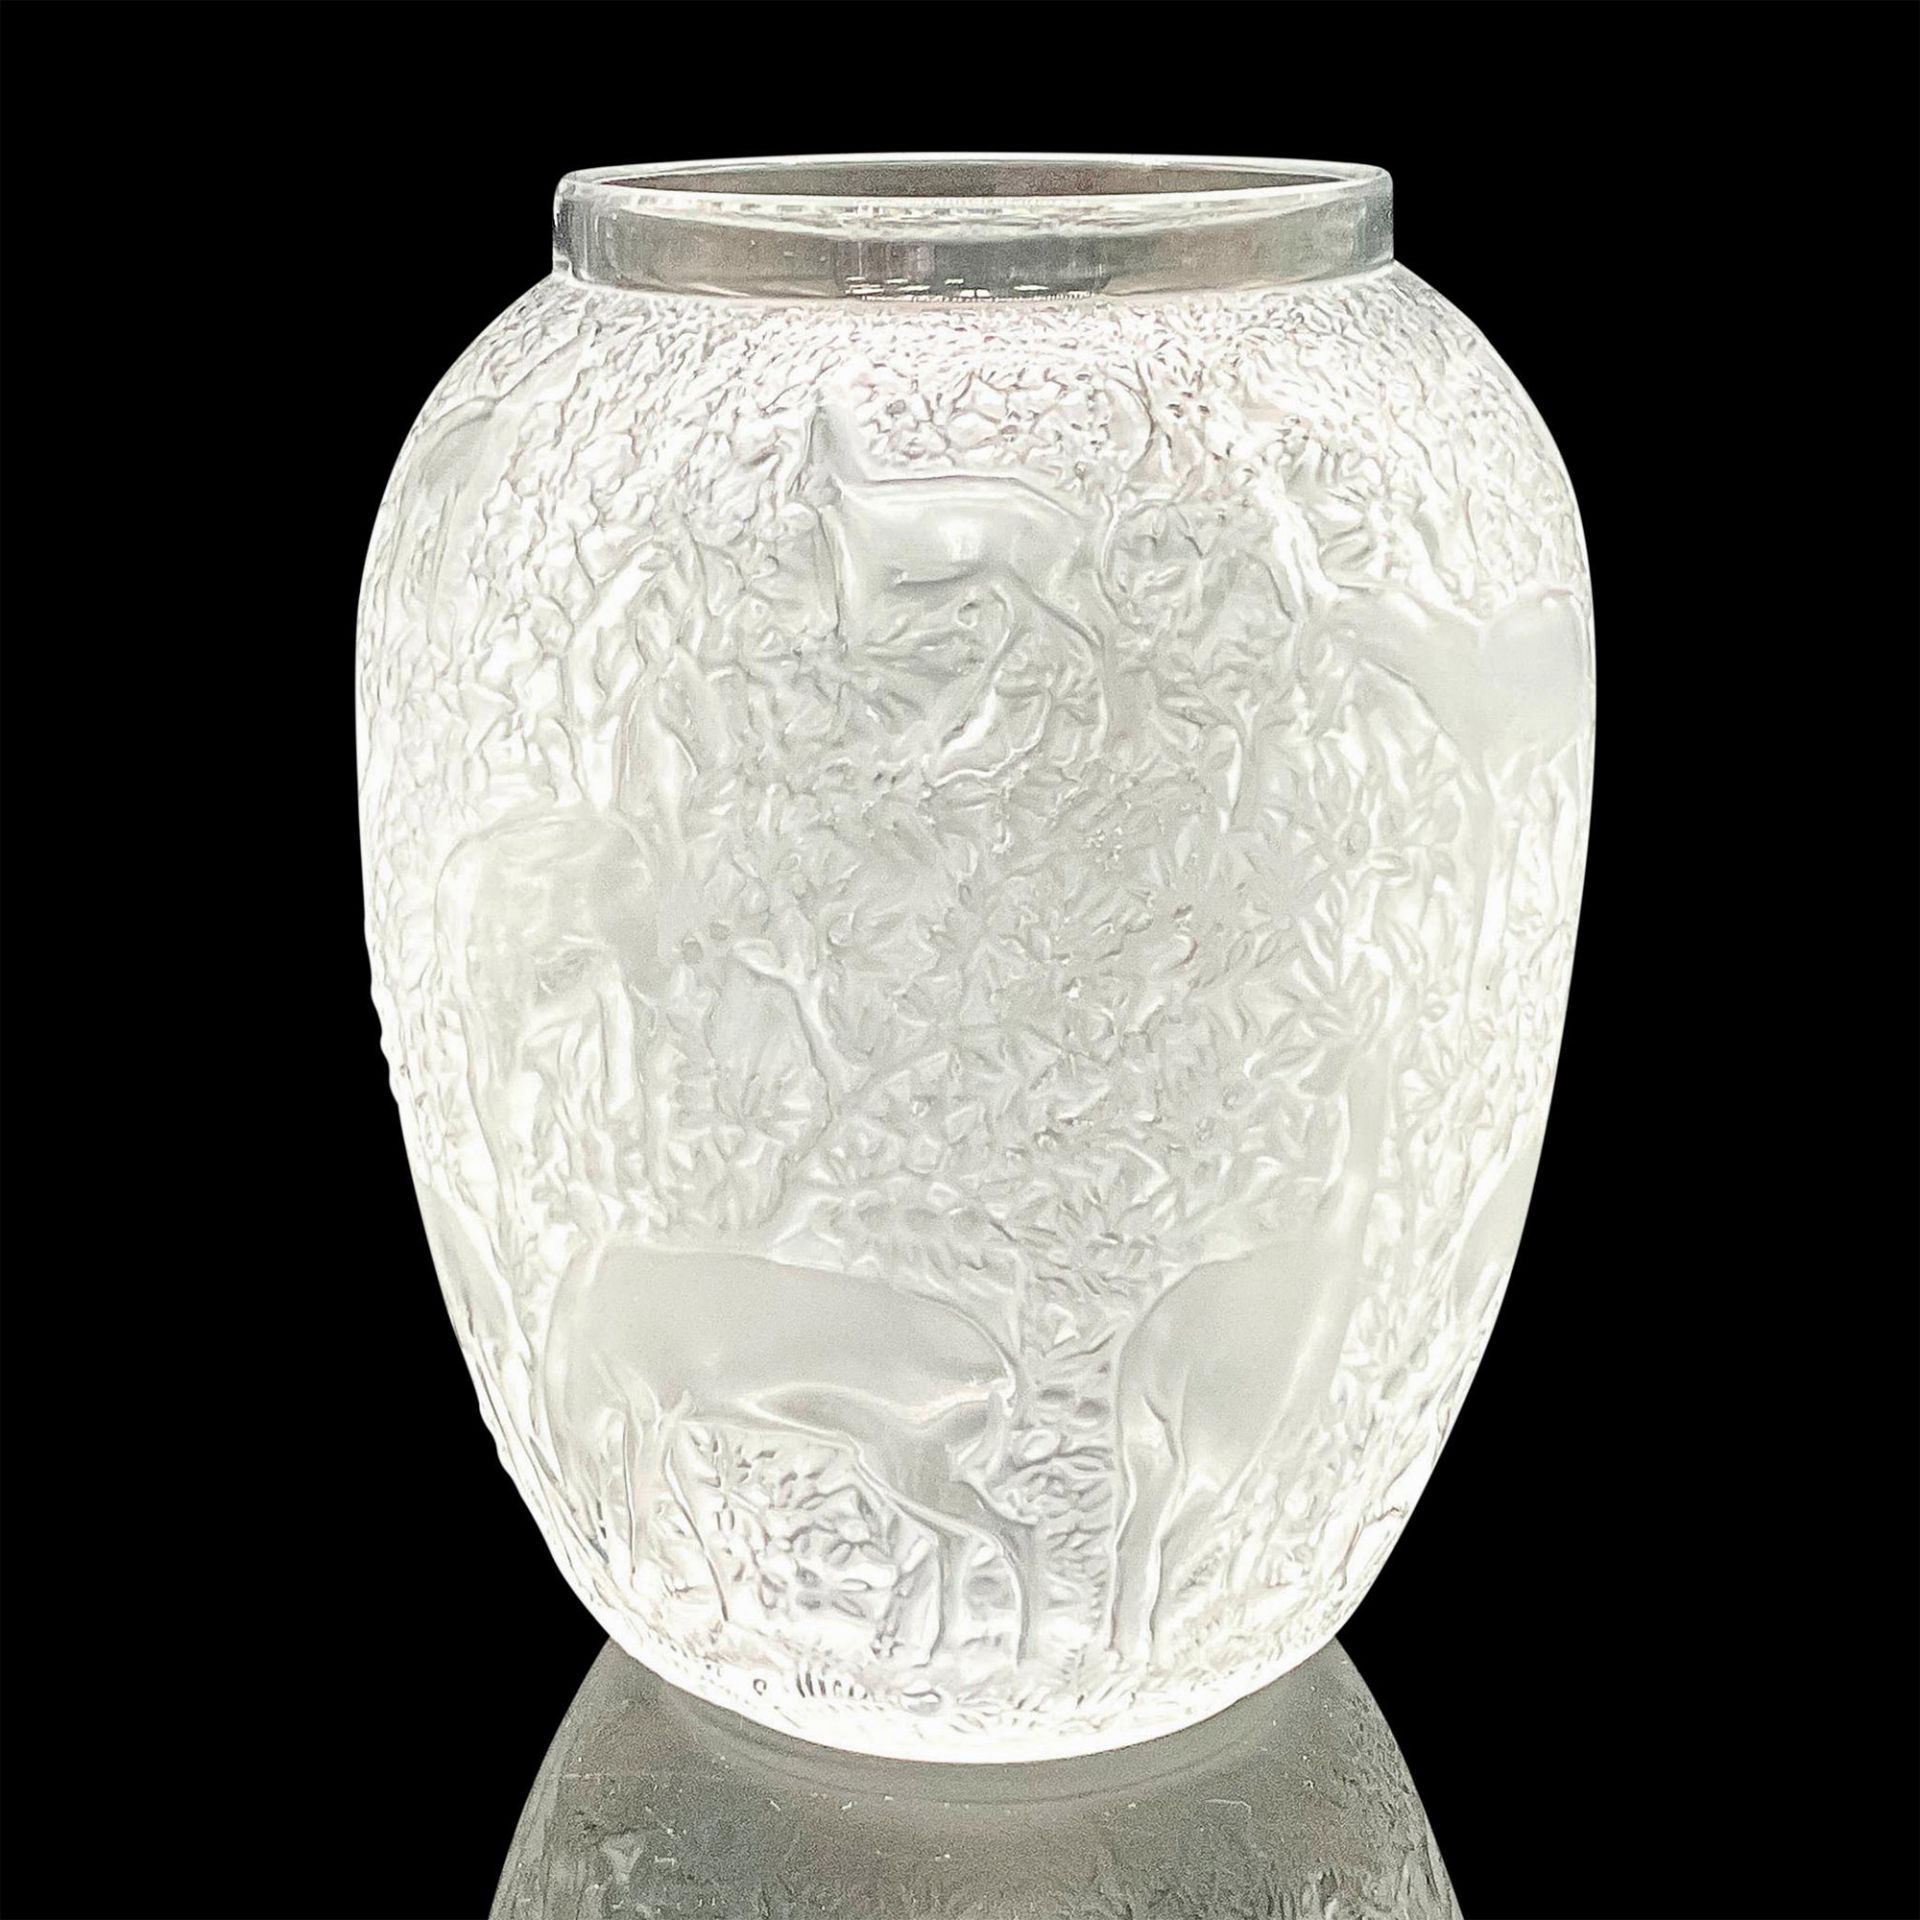 Lalique Crystal Vase, Biches - Image 2 of 3